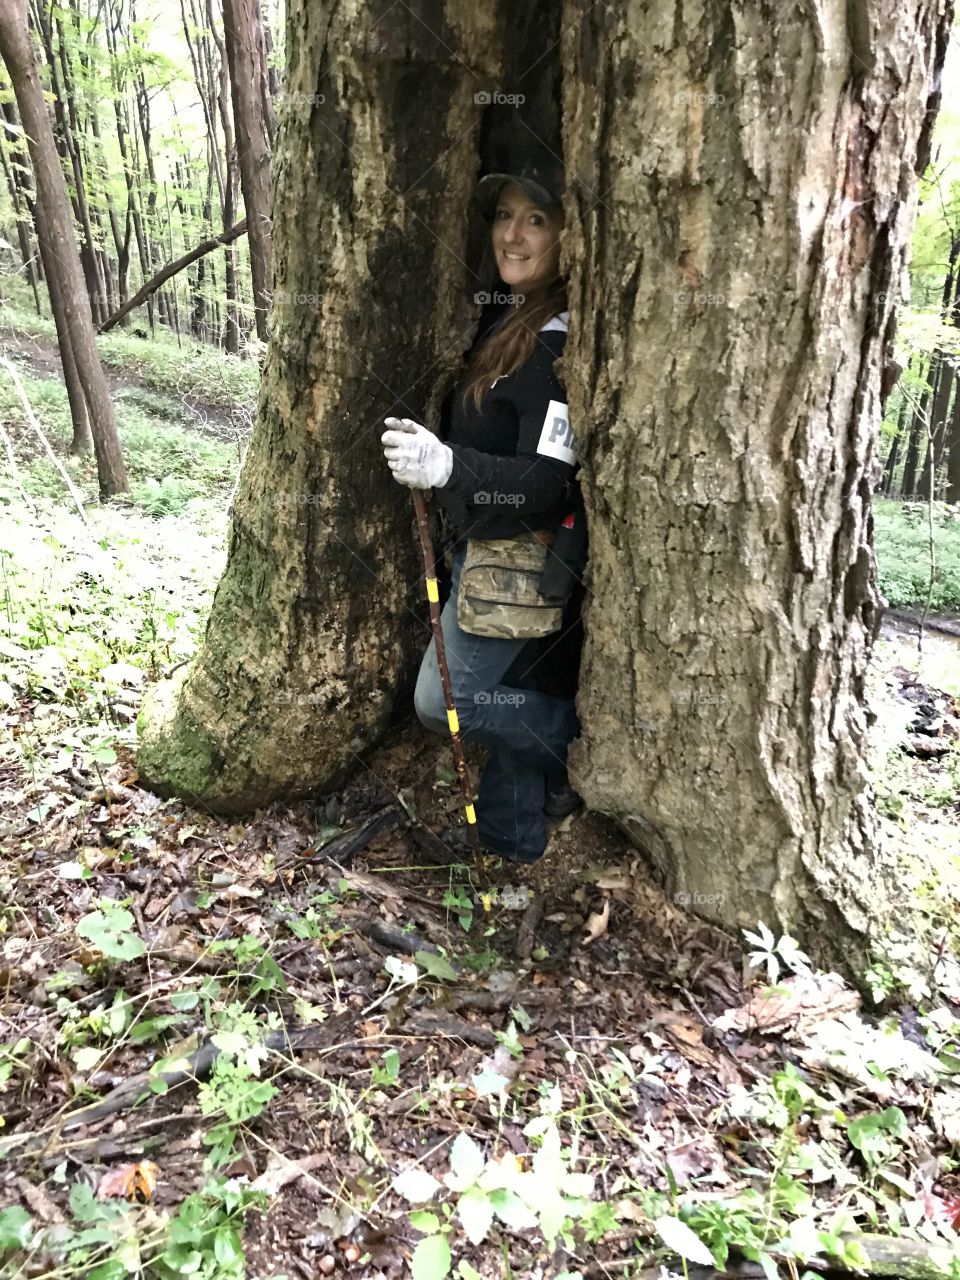 Me, standing inside a hollowed out tree. 